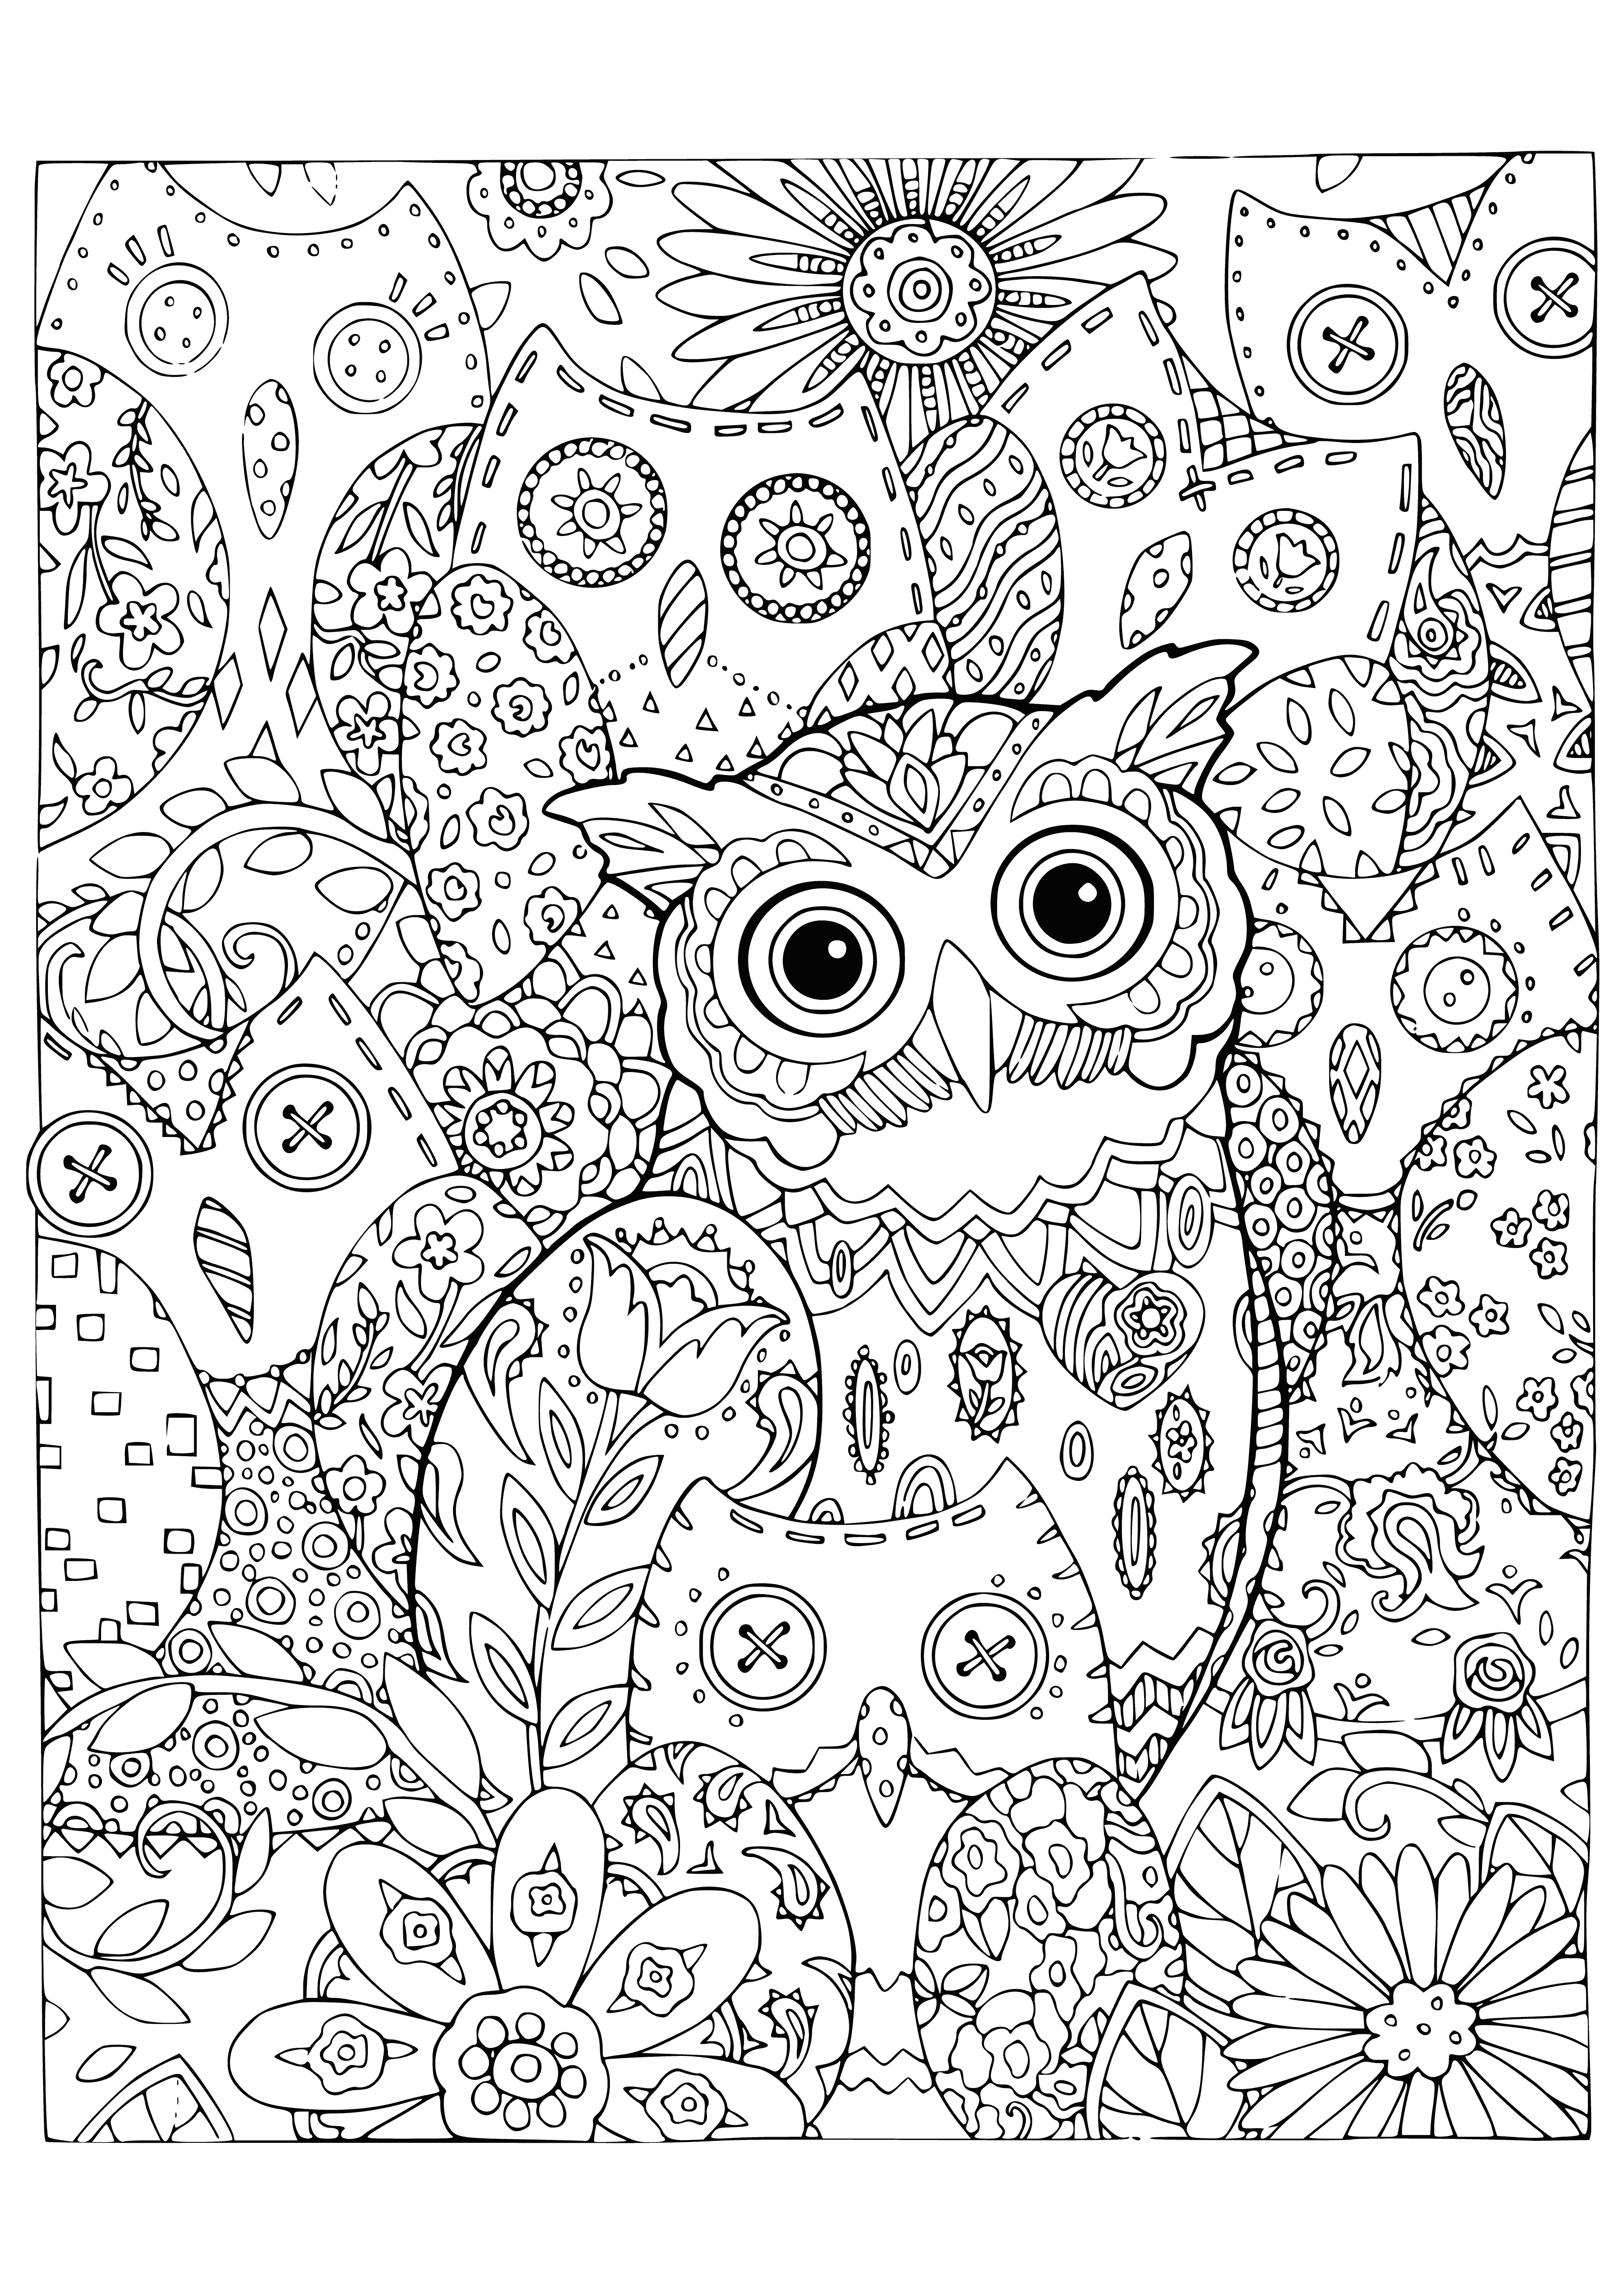 Crafts coloring page